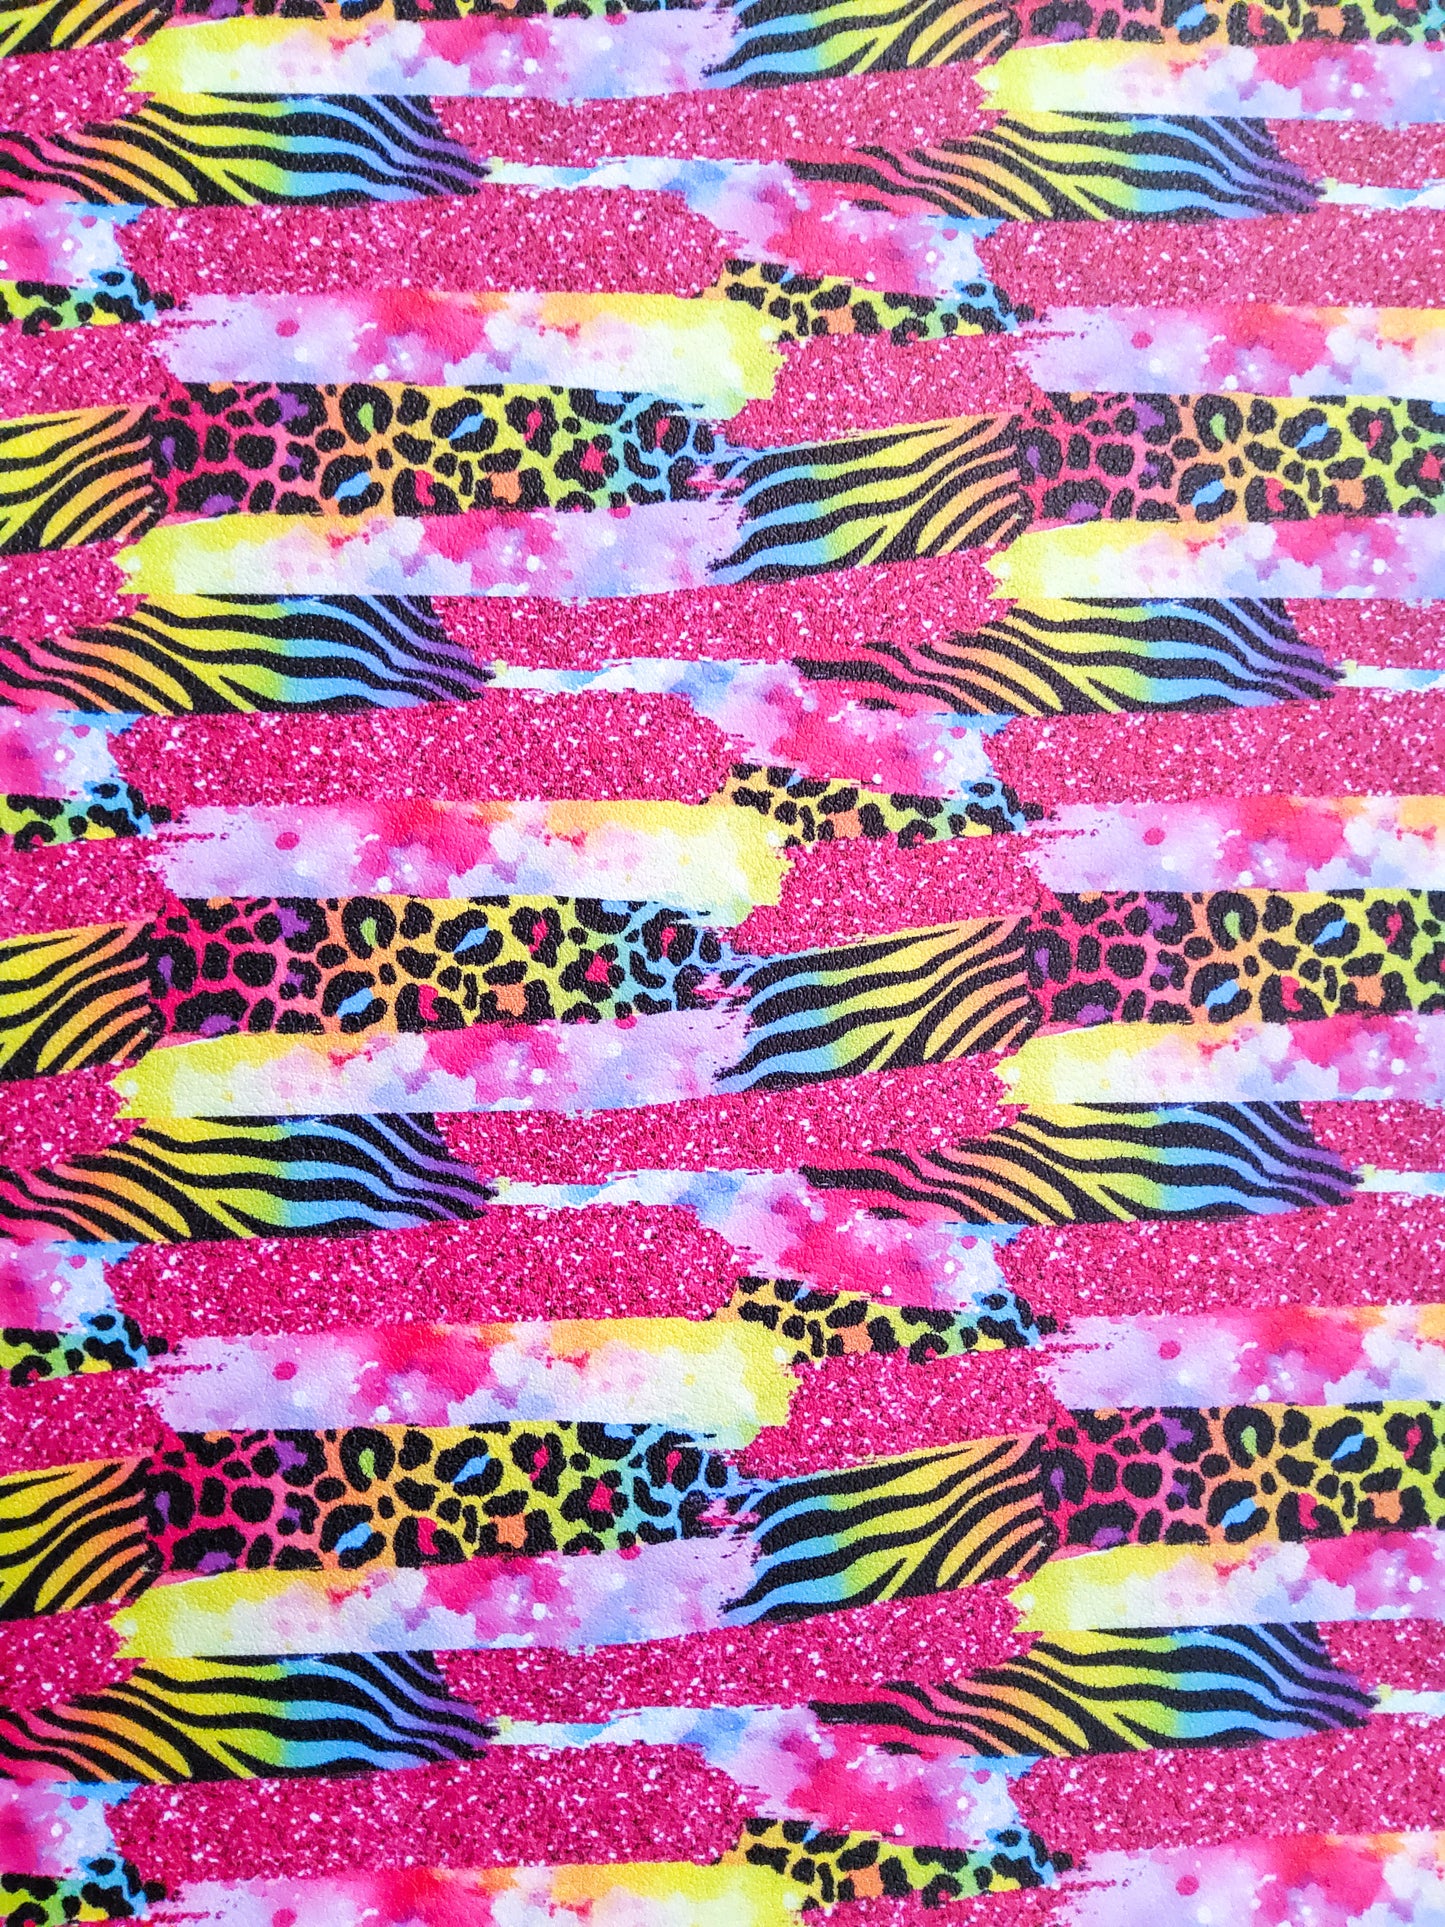 Colorful Animal Print Brushstrokes 9x12 faux leather sheet